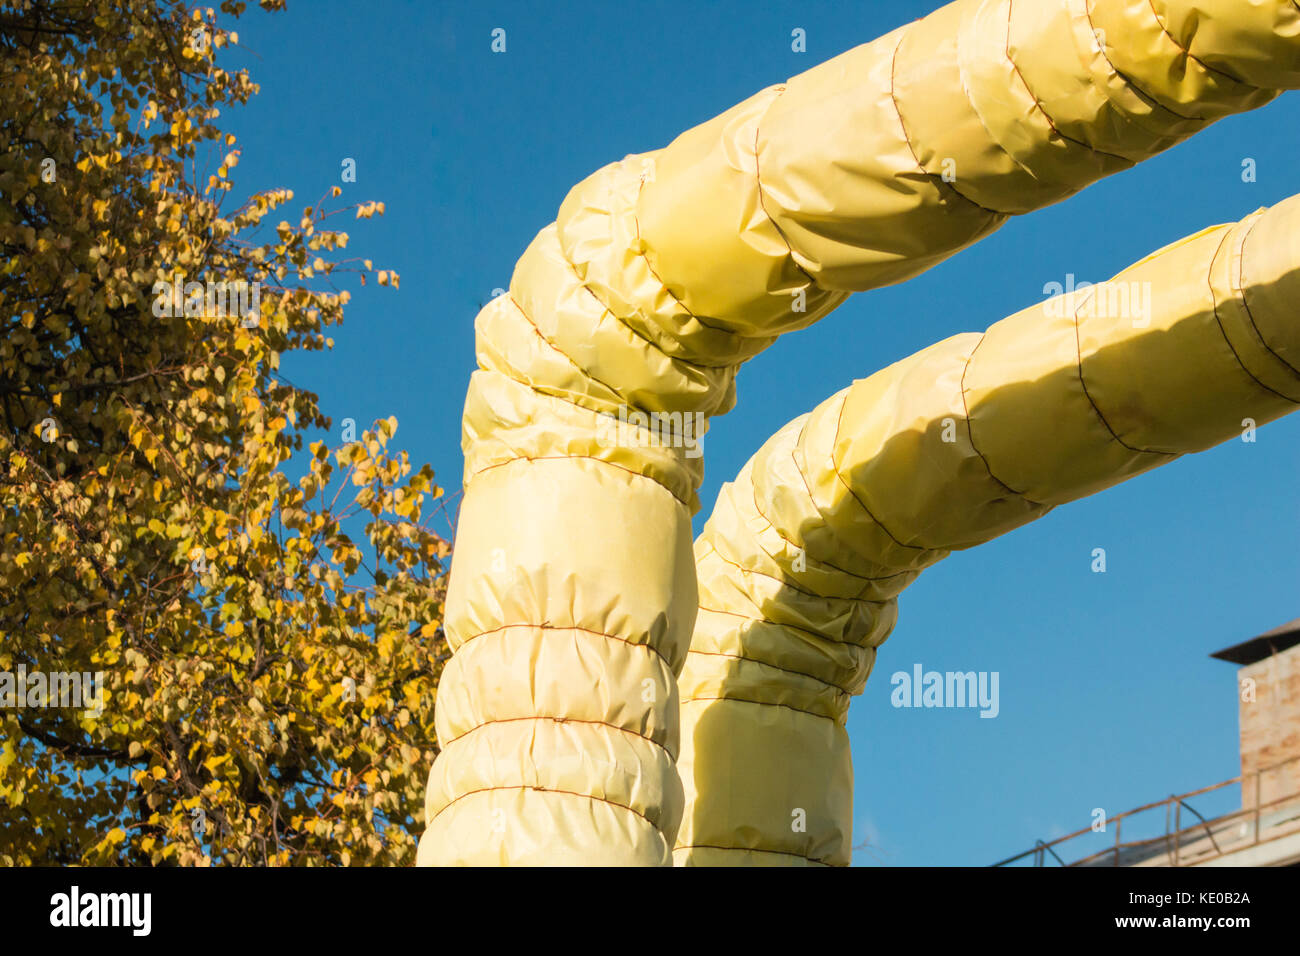 heat insulation of hot water pipes in autumn. Stock Photo